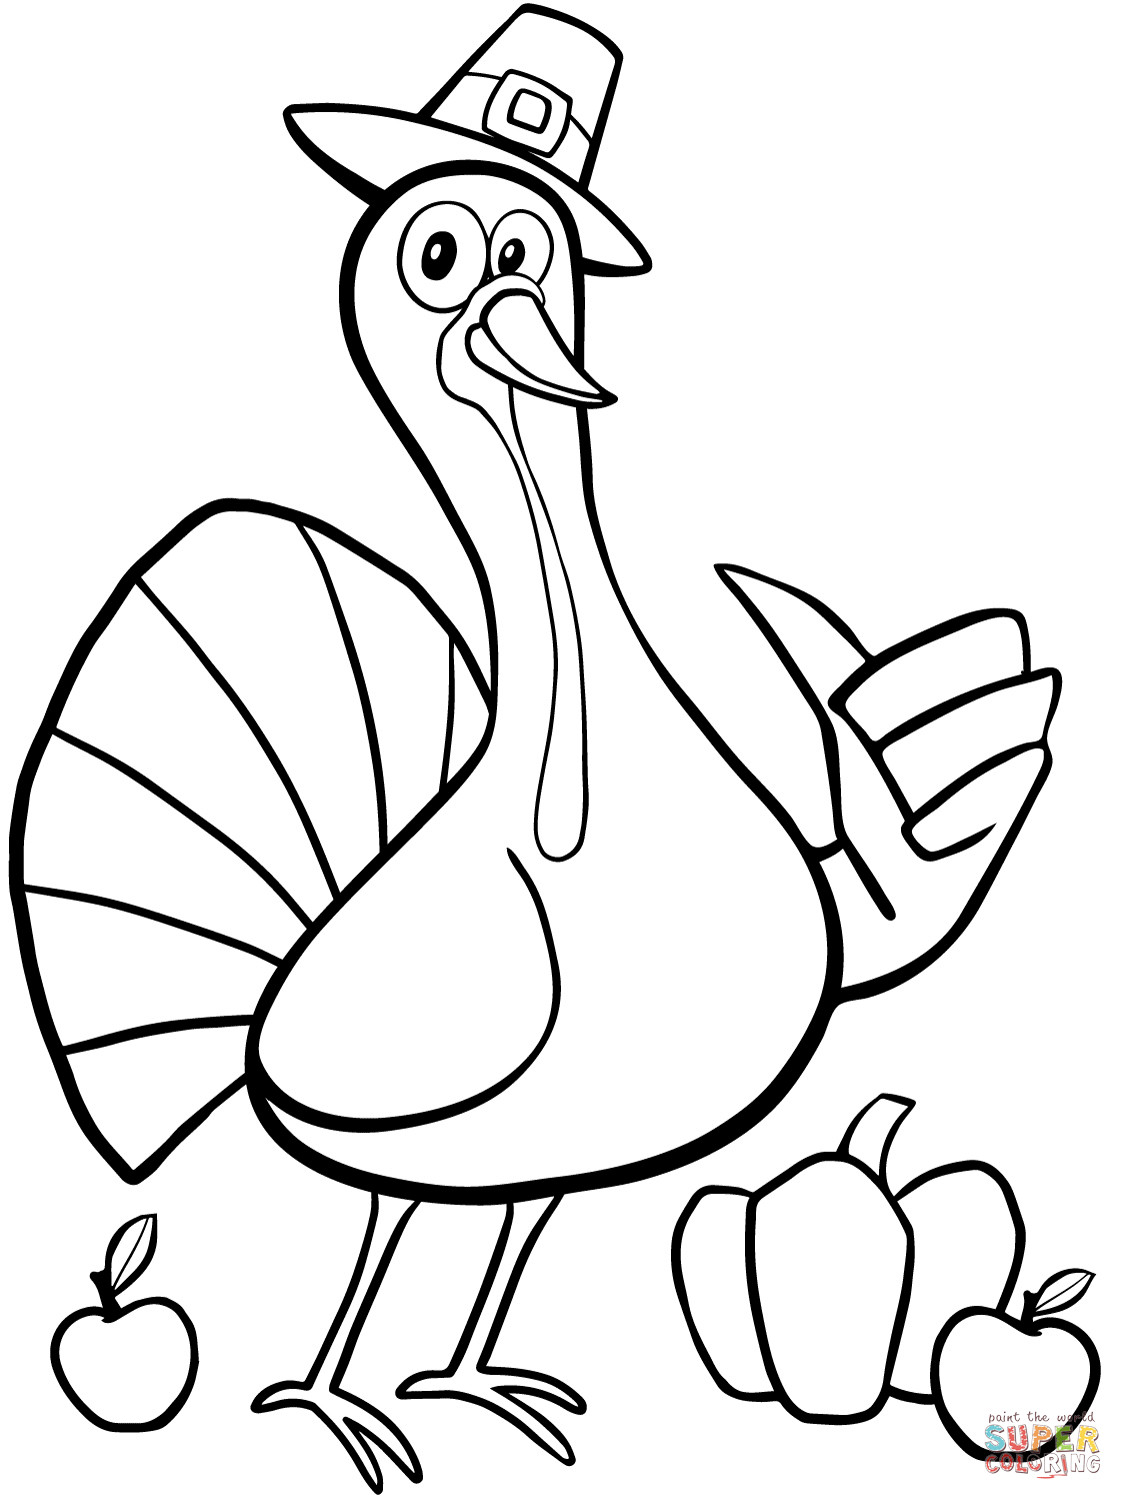 Coloring Book Pages Of Turkeys
 Cool Thanksgiving Turkey coloring page